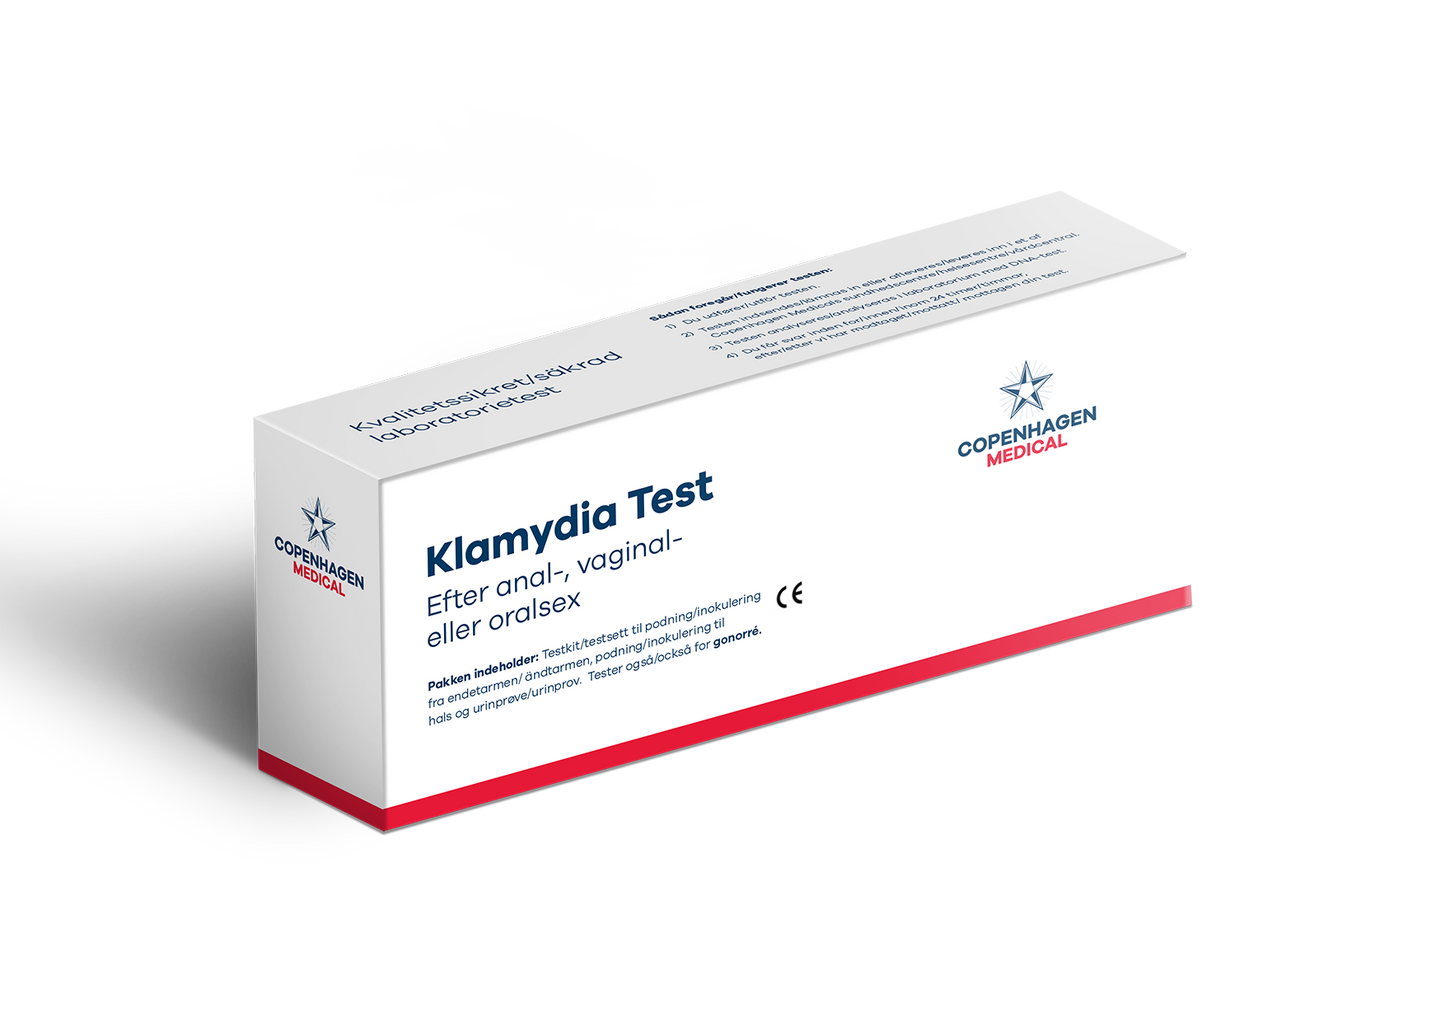 Chlamydia test - after anal, vaginal or oral sex